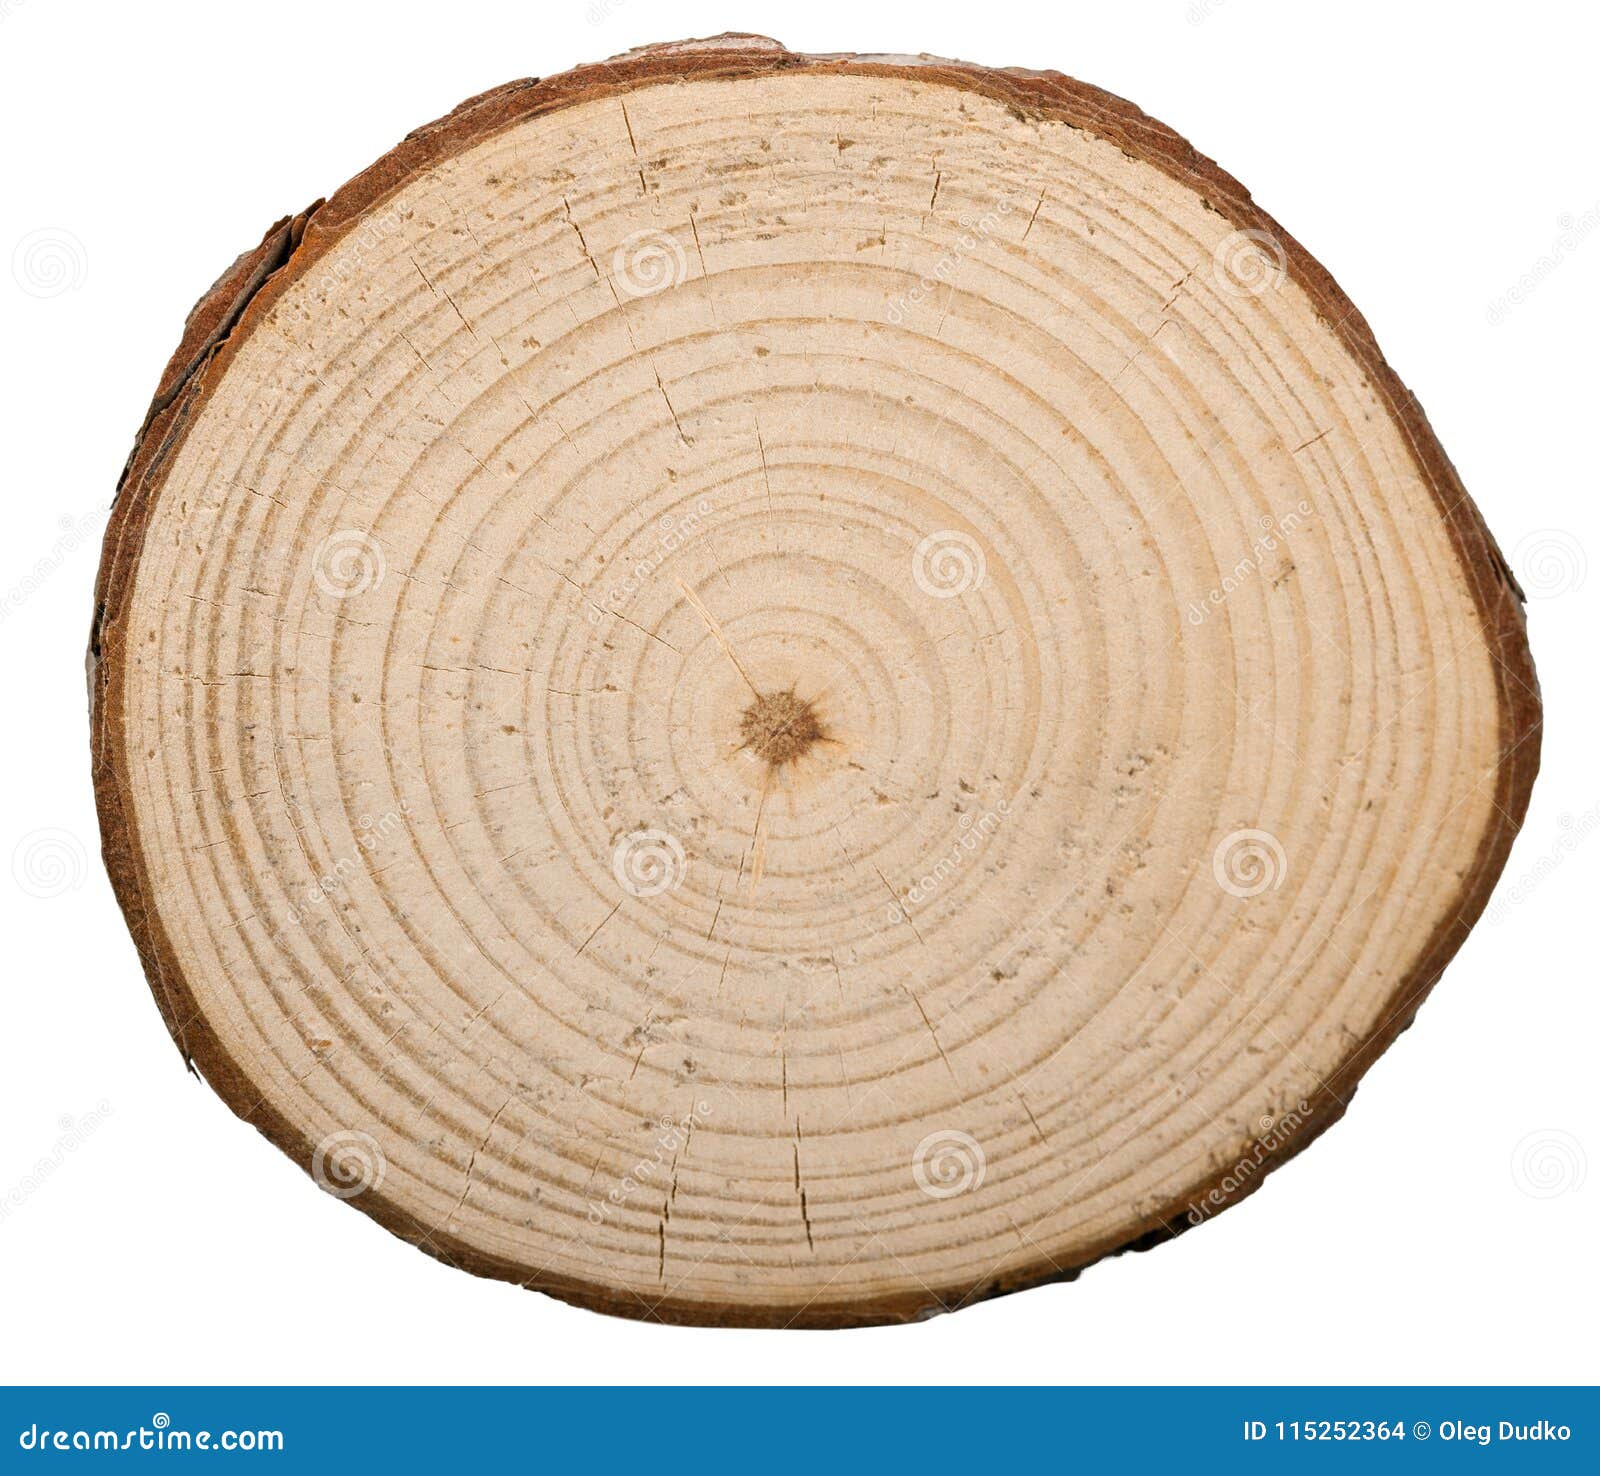 Tree Rings Dendrochronology Way Measuring Scientific Stock Photo 648679210  | Shutterstock